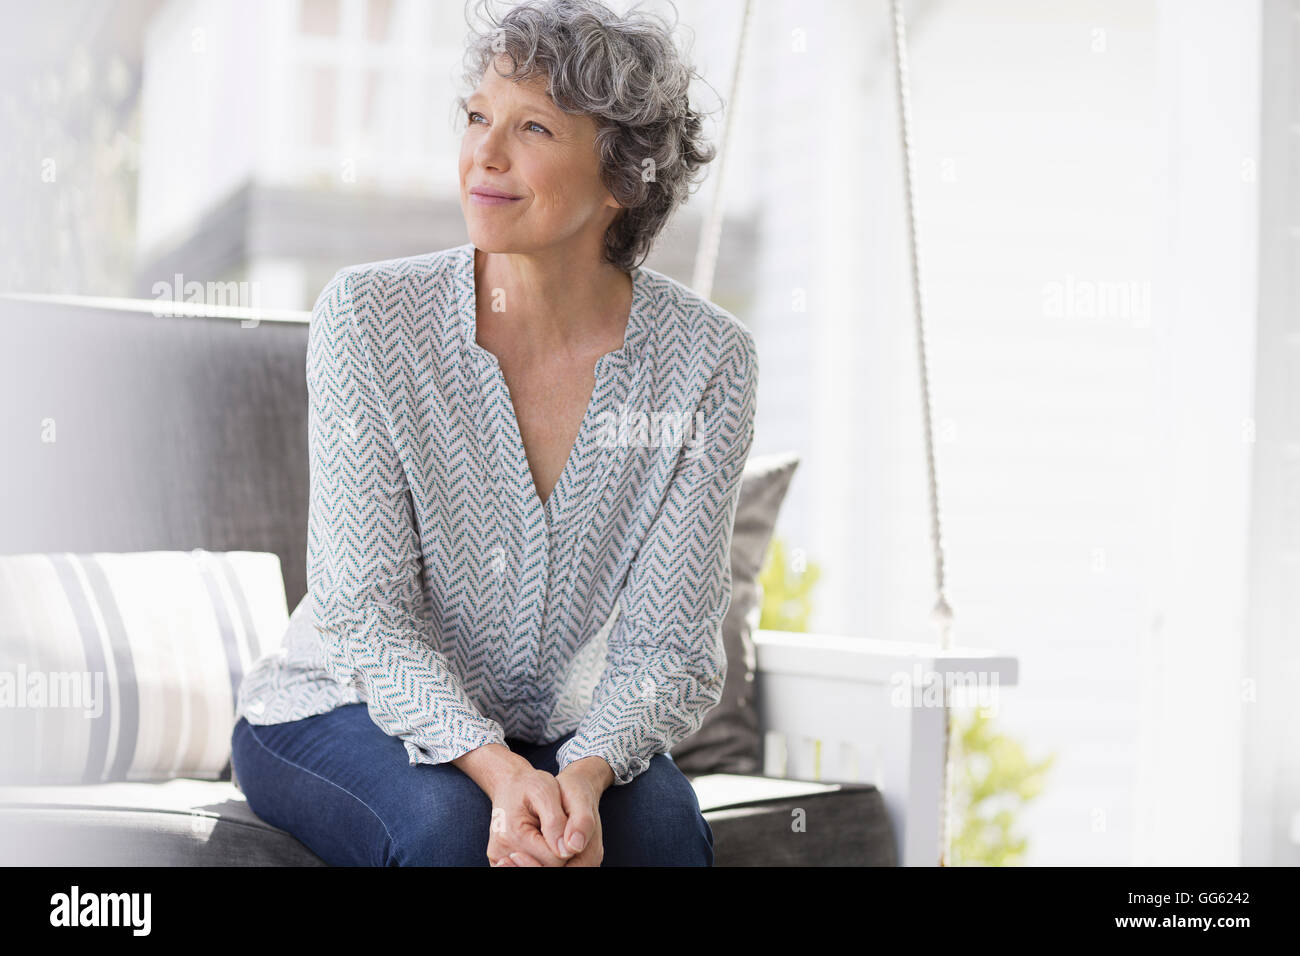 Woman sitting on a swing and day dreaming Stock Photo